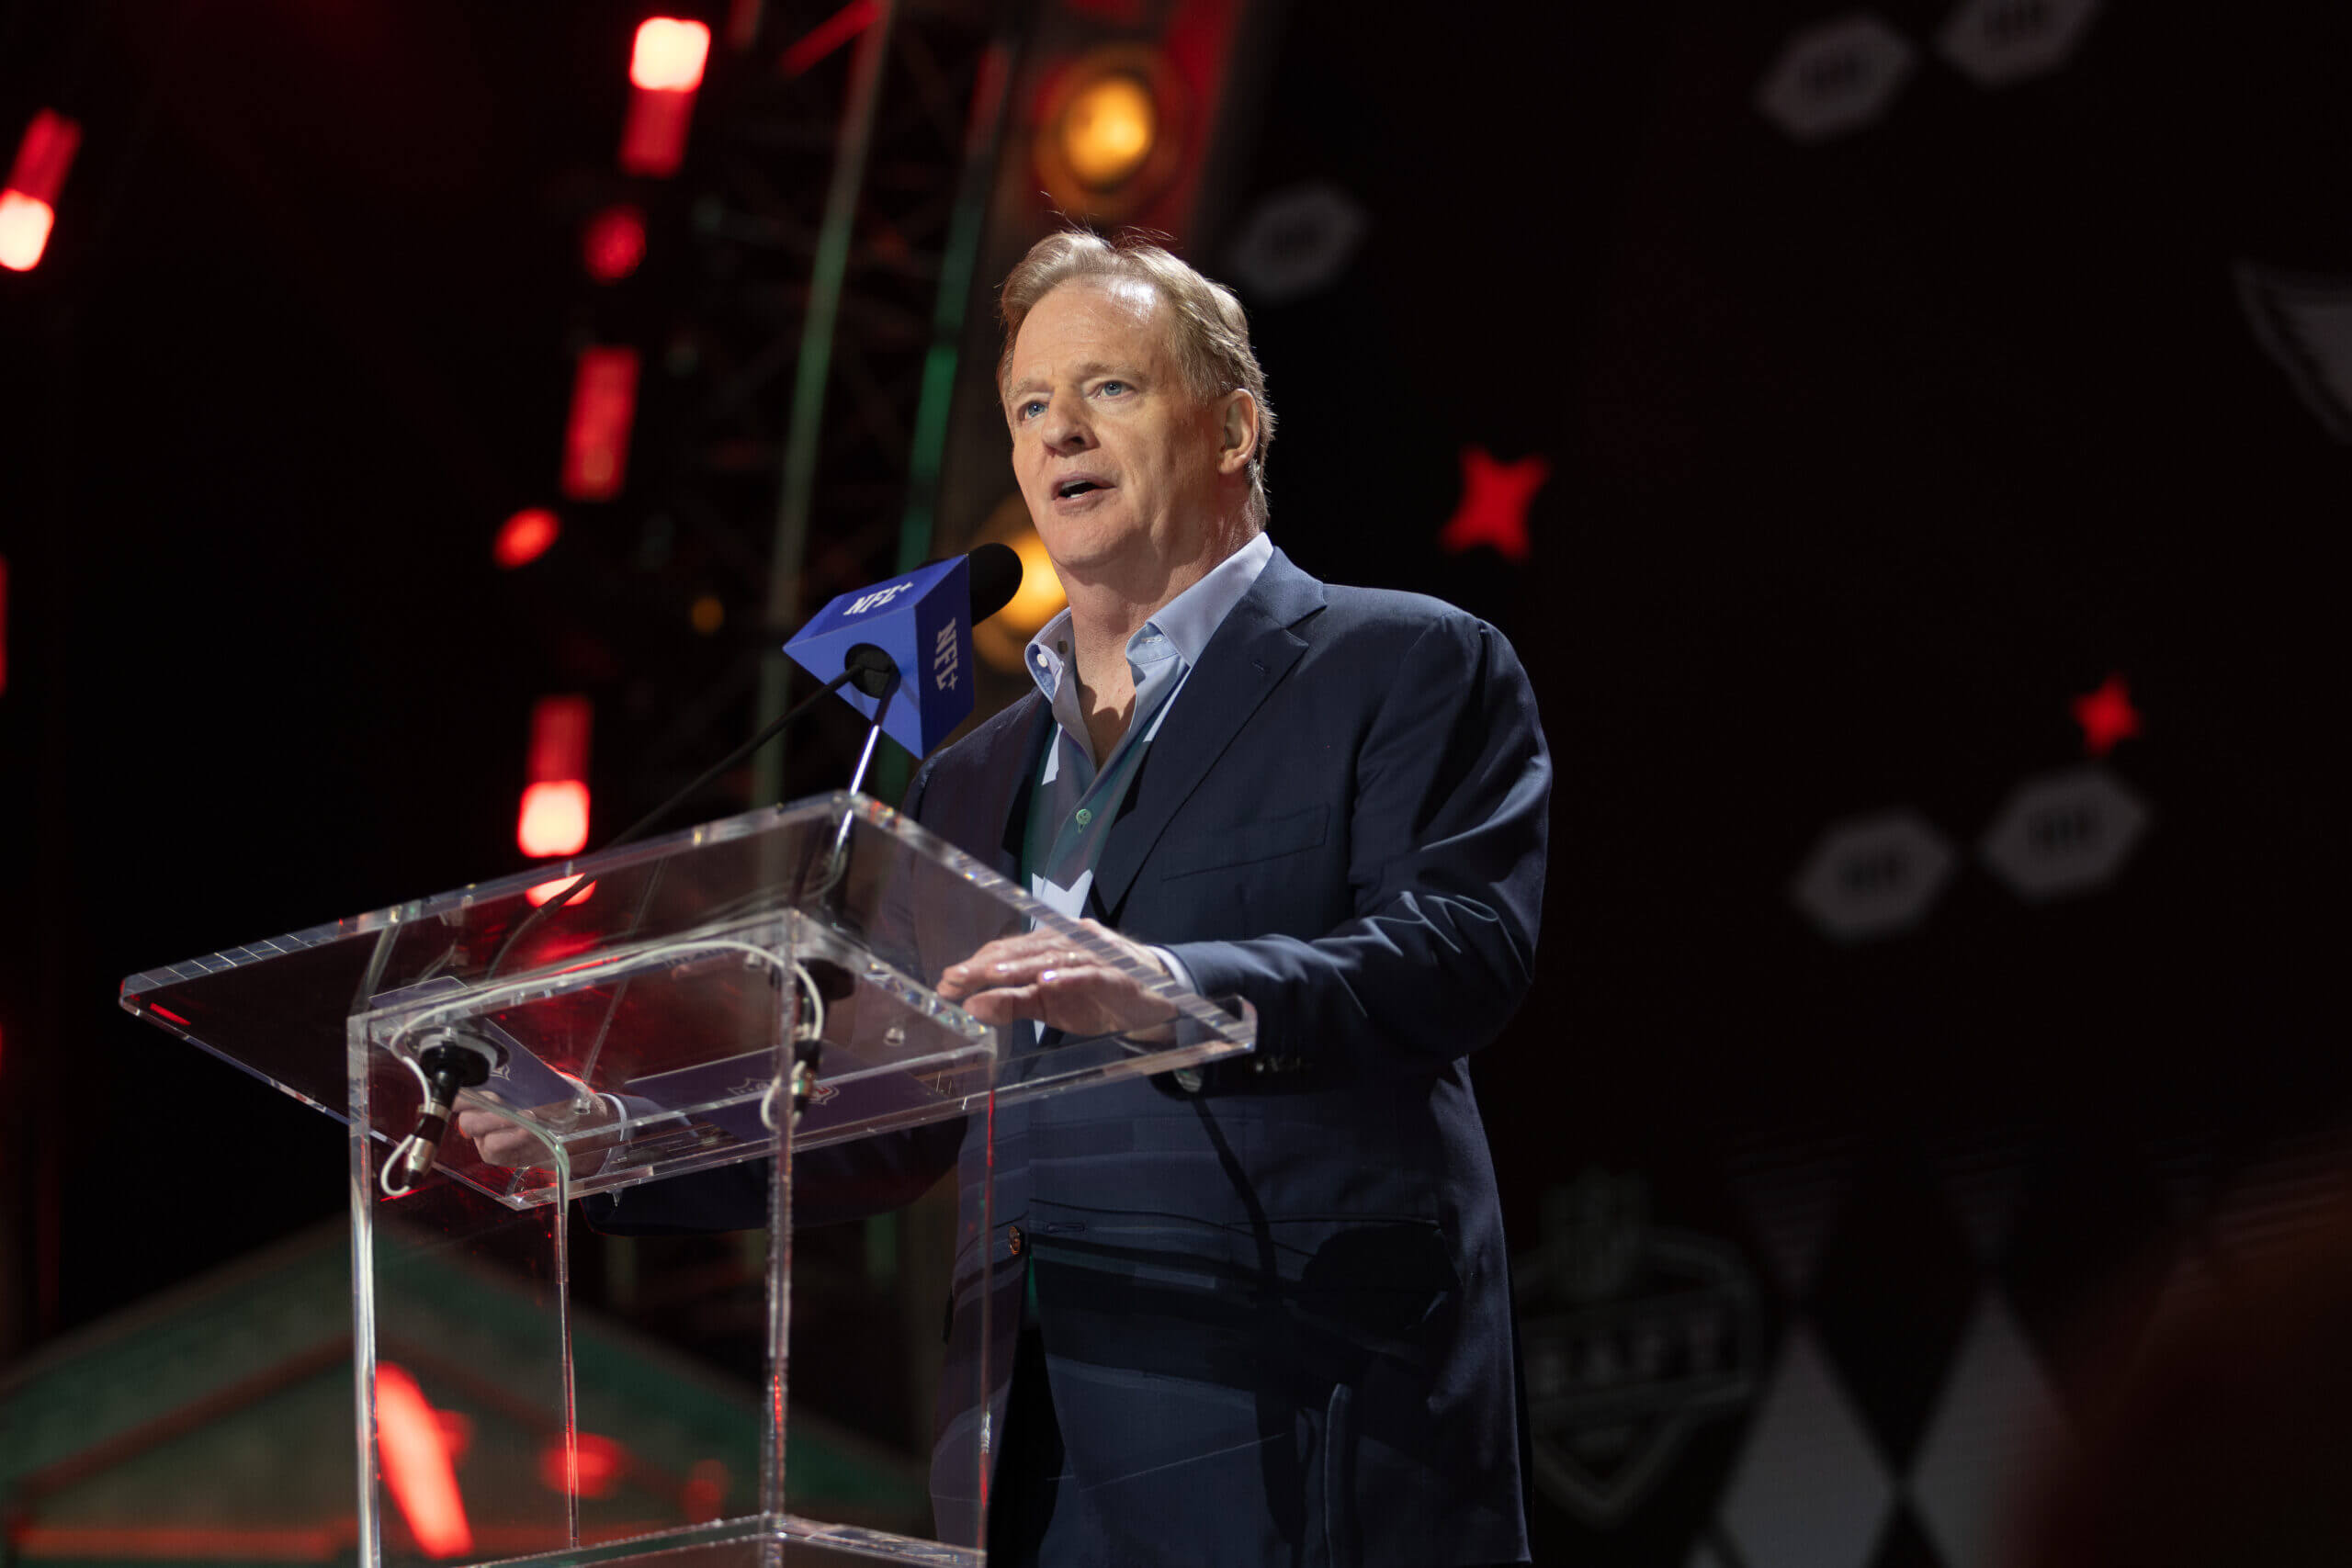 Despite Roger Goodell’s hypothetical, no talks between NFL owners, union on 18-game schedule: Sources